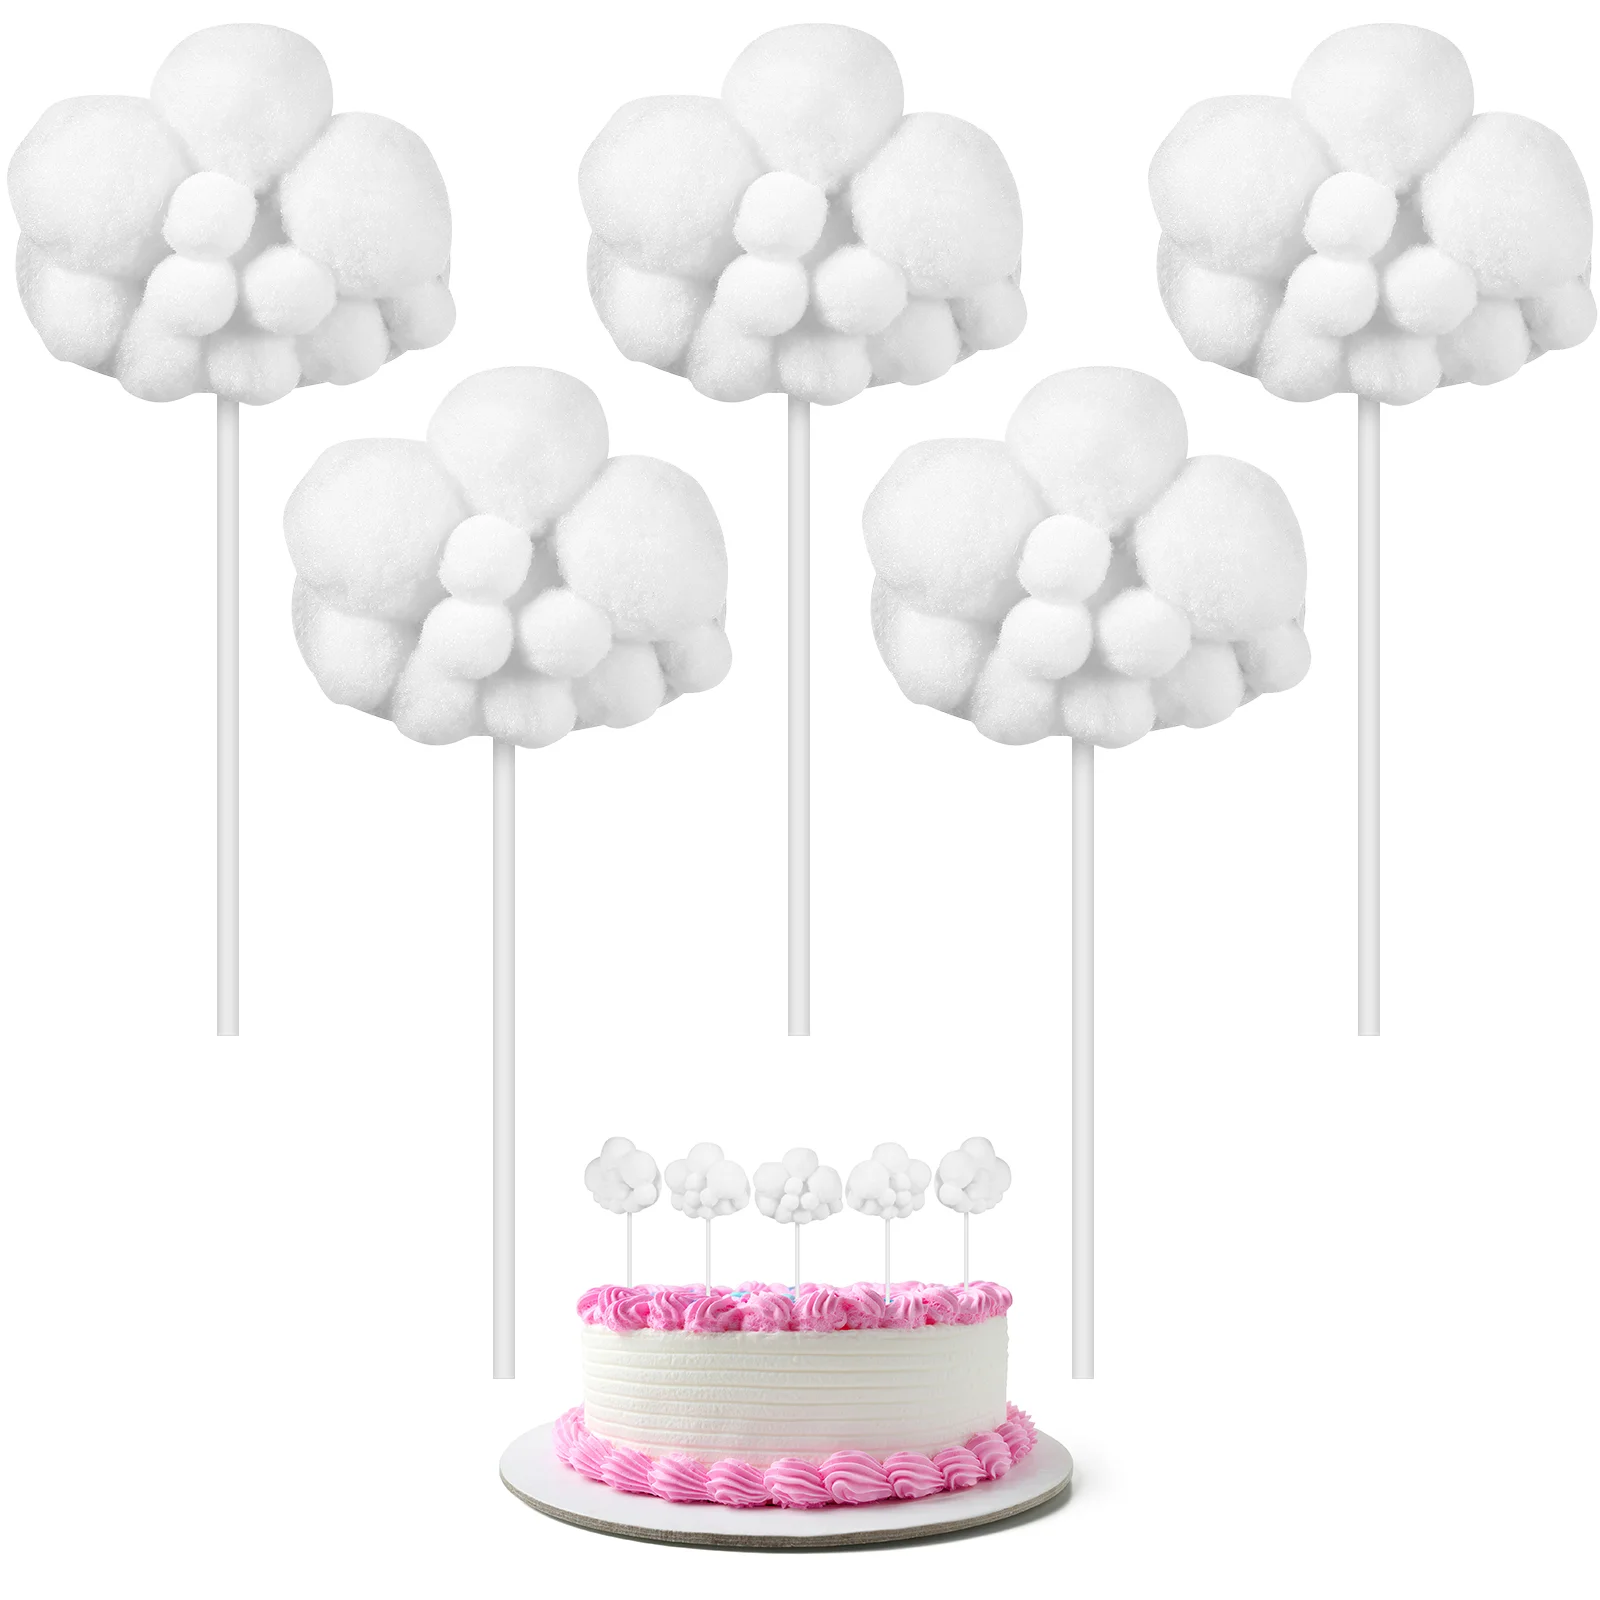 

White Clouds Cake Decorative Toppers Personality Party Decoration Cupcake Wedding